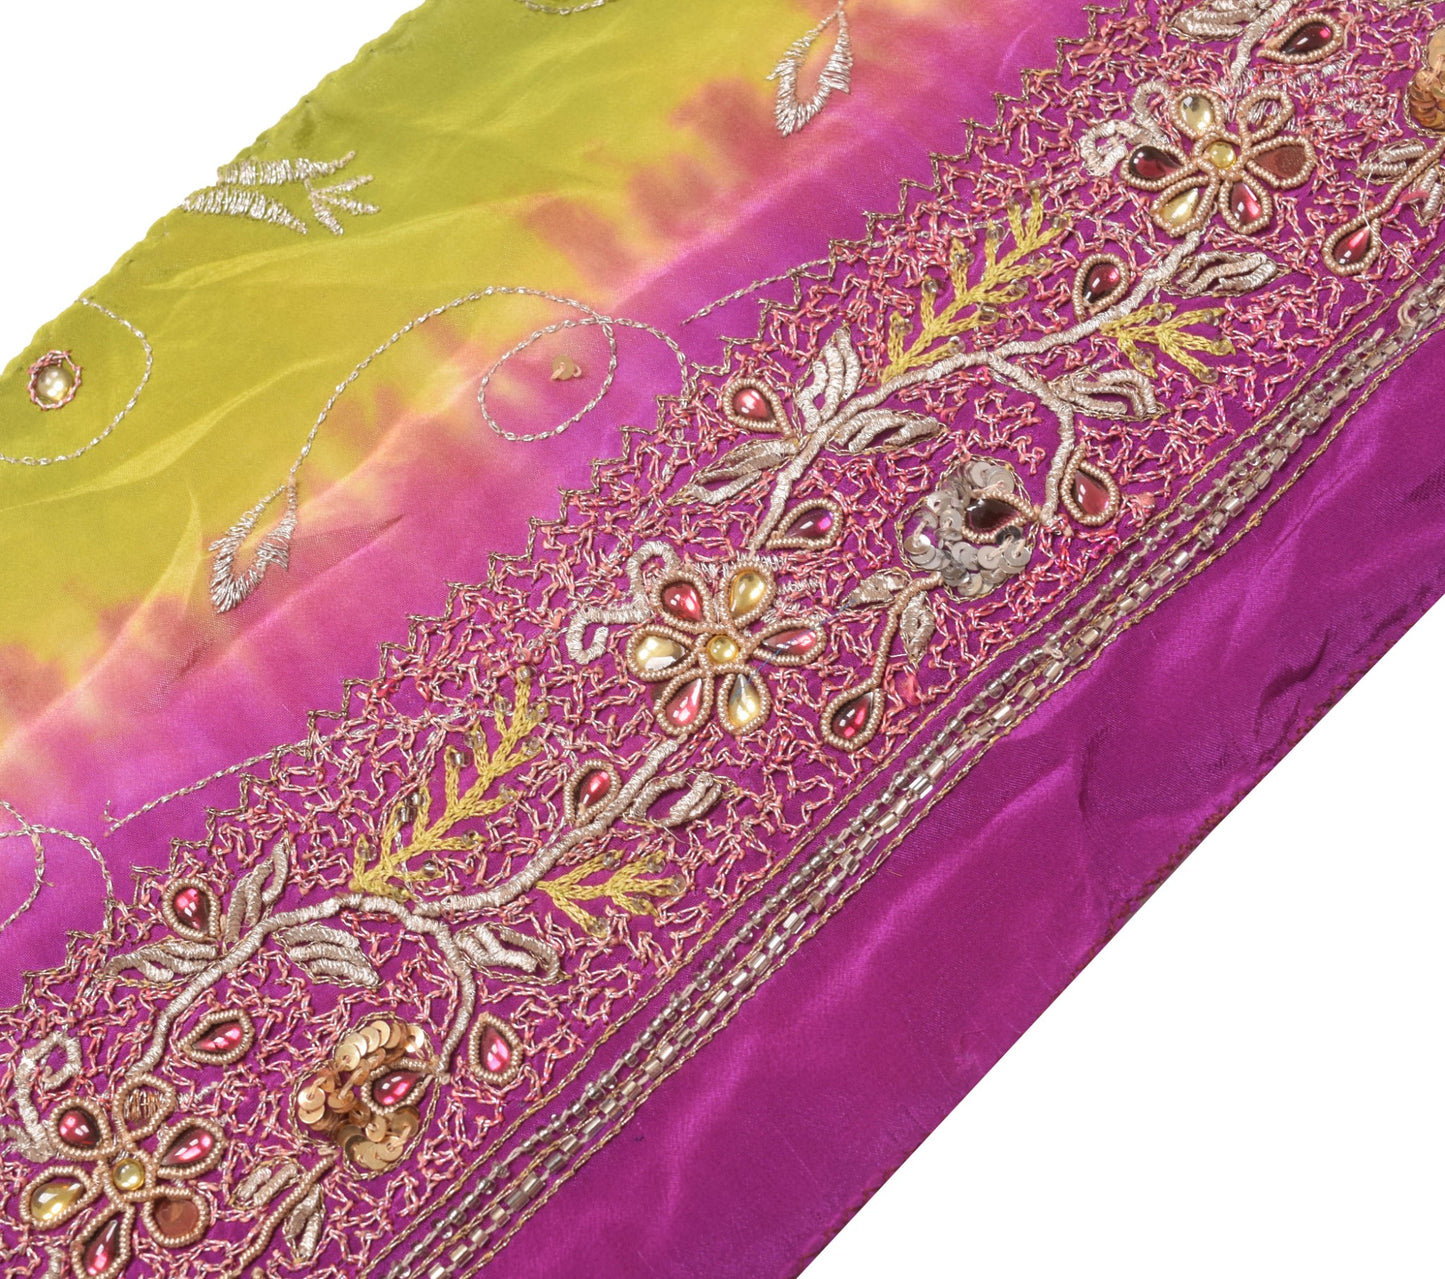 Sushila Vintage Purple Saree Border Indian Craft Sewing Trim Embroidered Lace